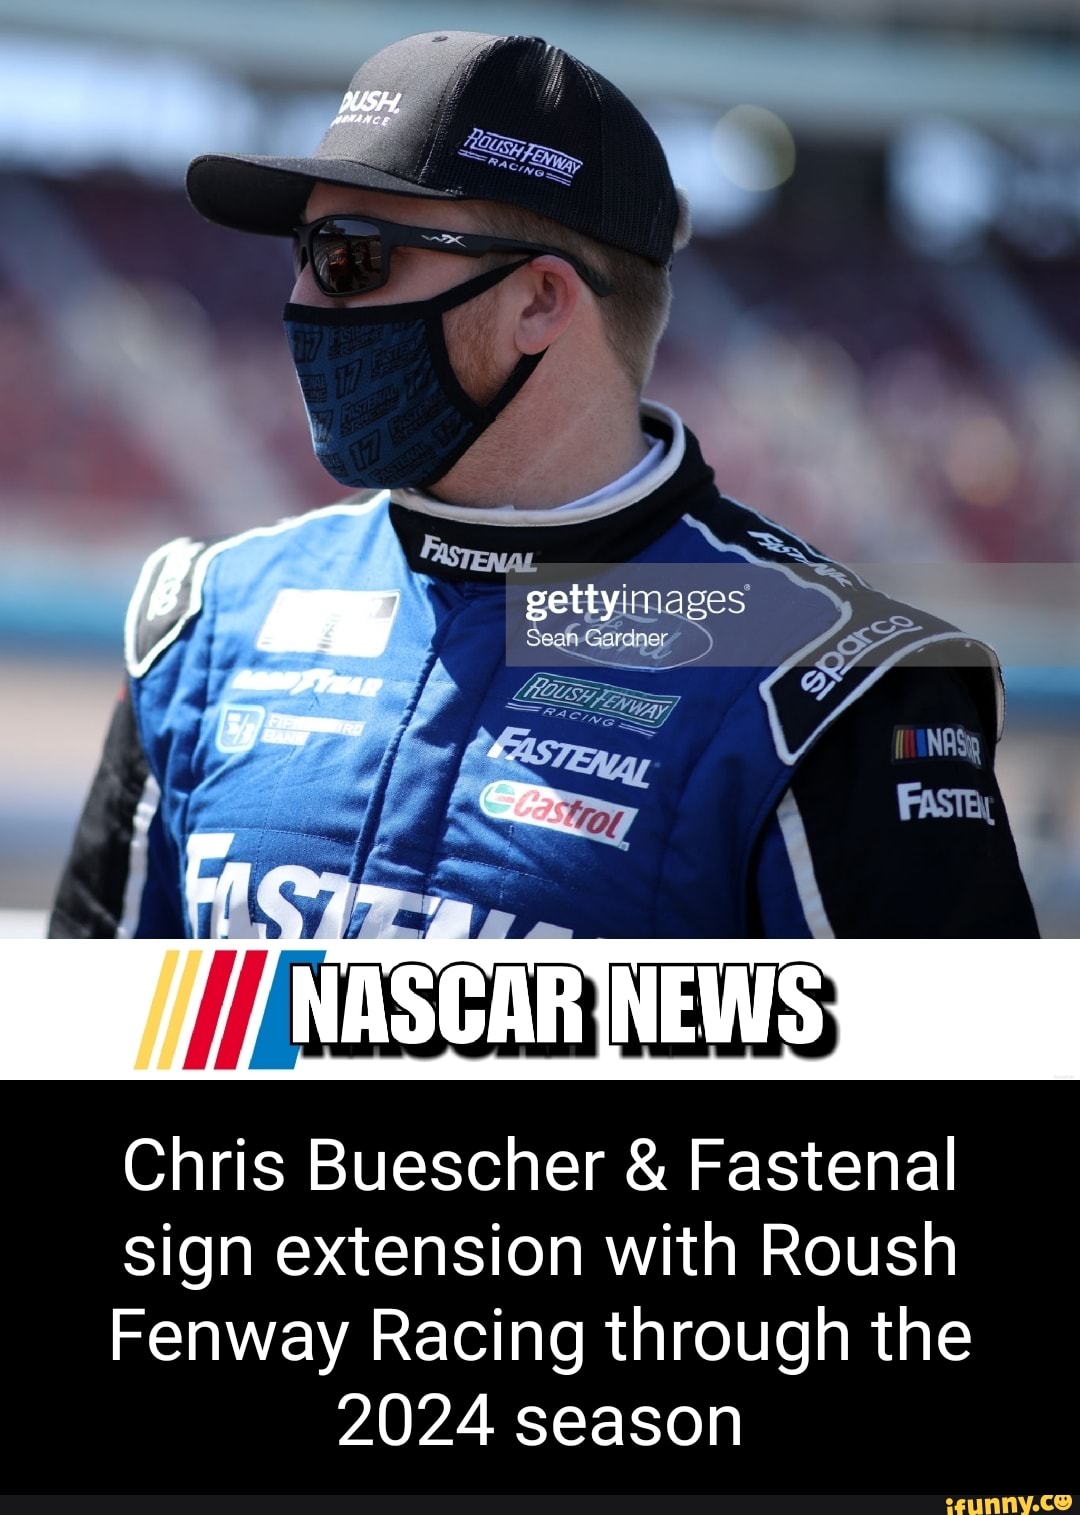 Chris Buescher & Fastenal sign extension with Roush Fenway Racing